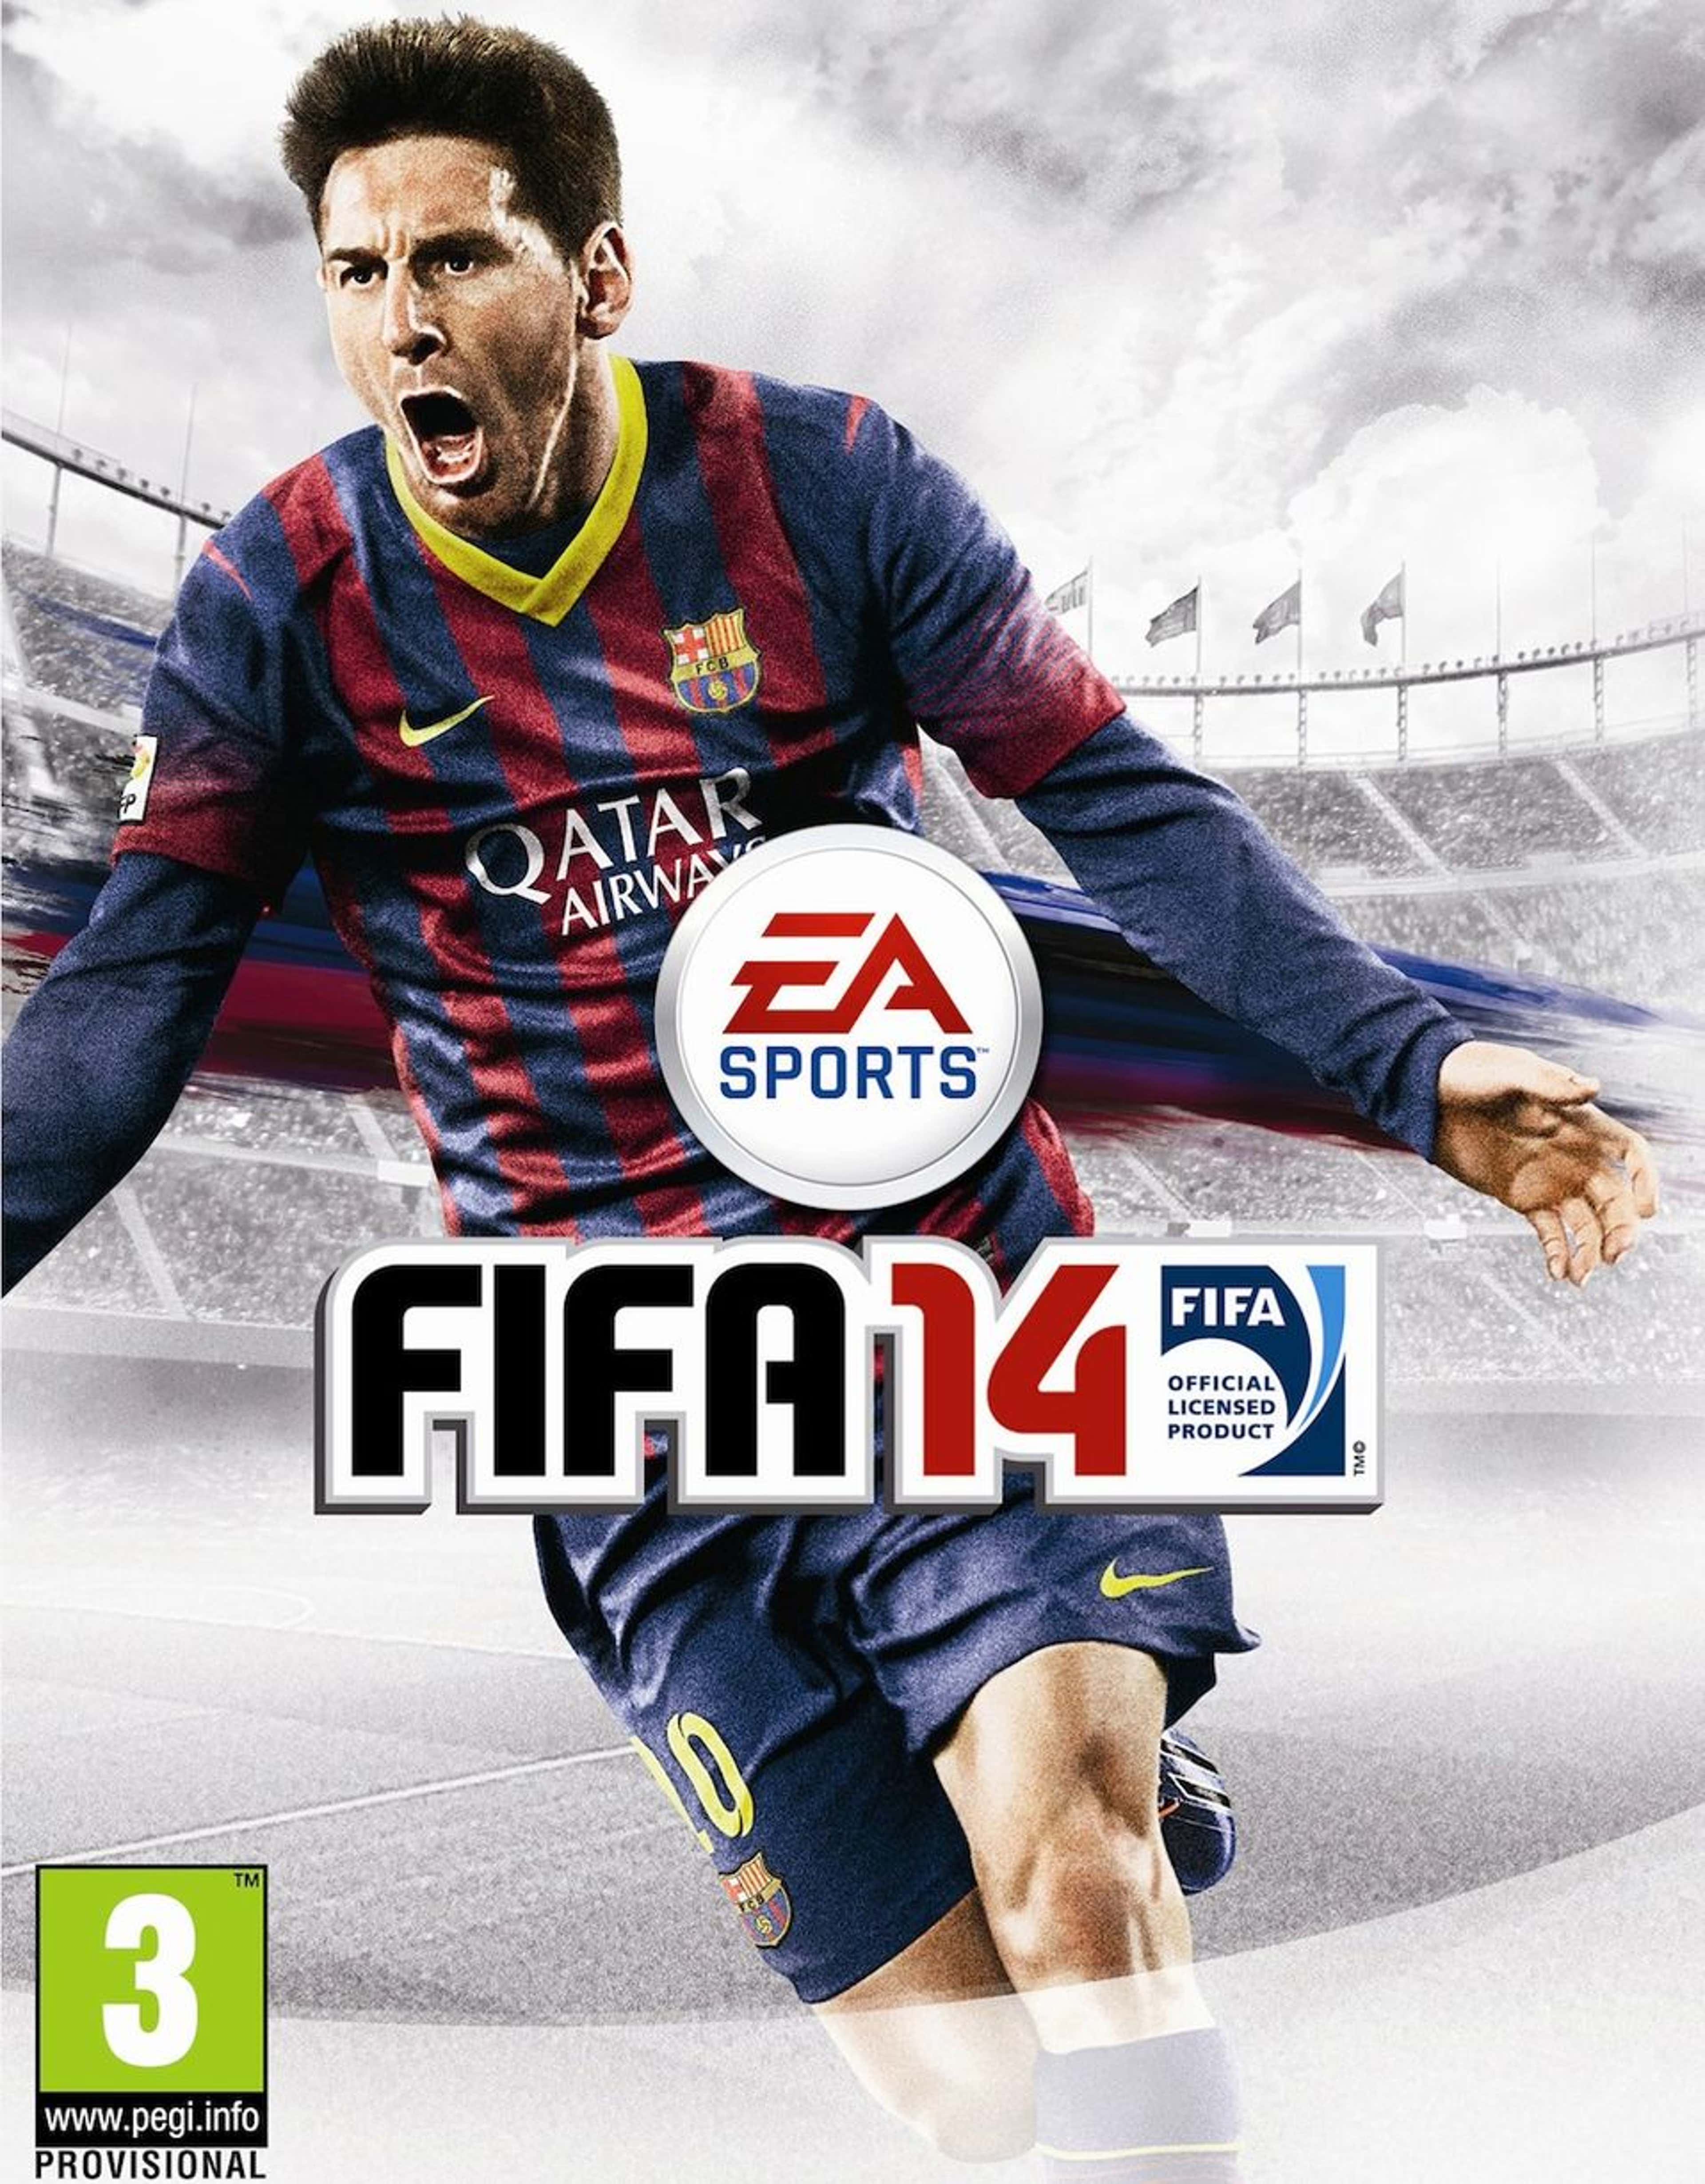 FIFA 23: Every FIFA video game cover since inception